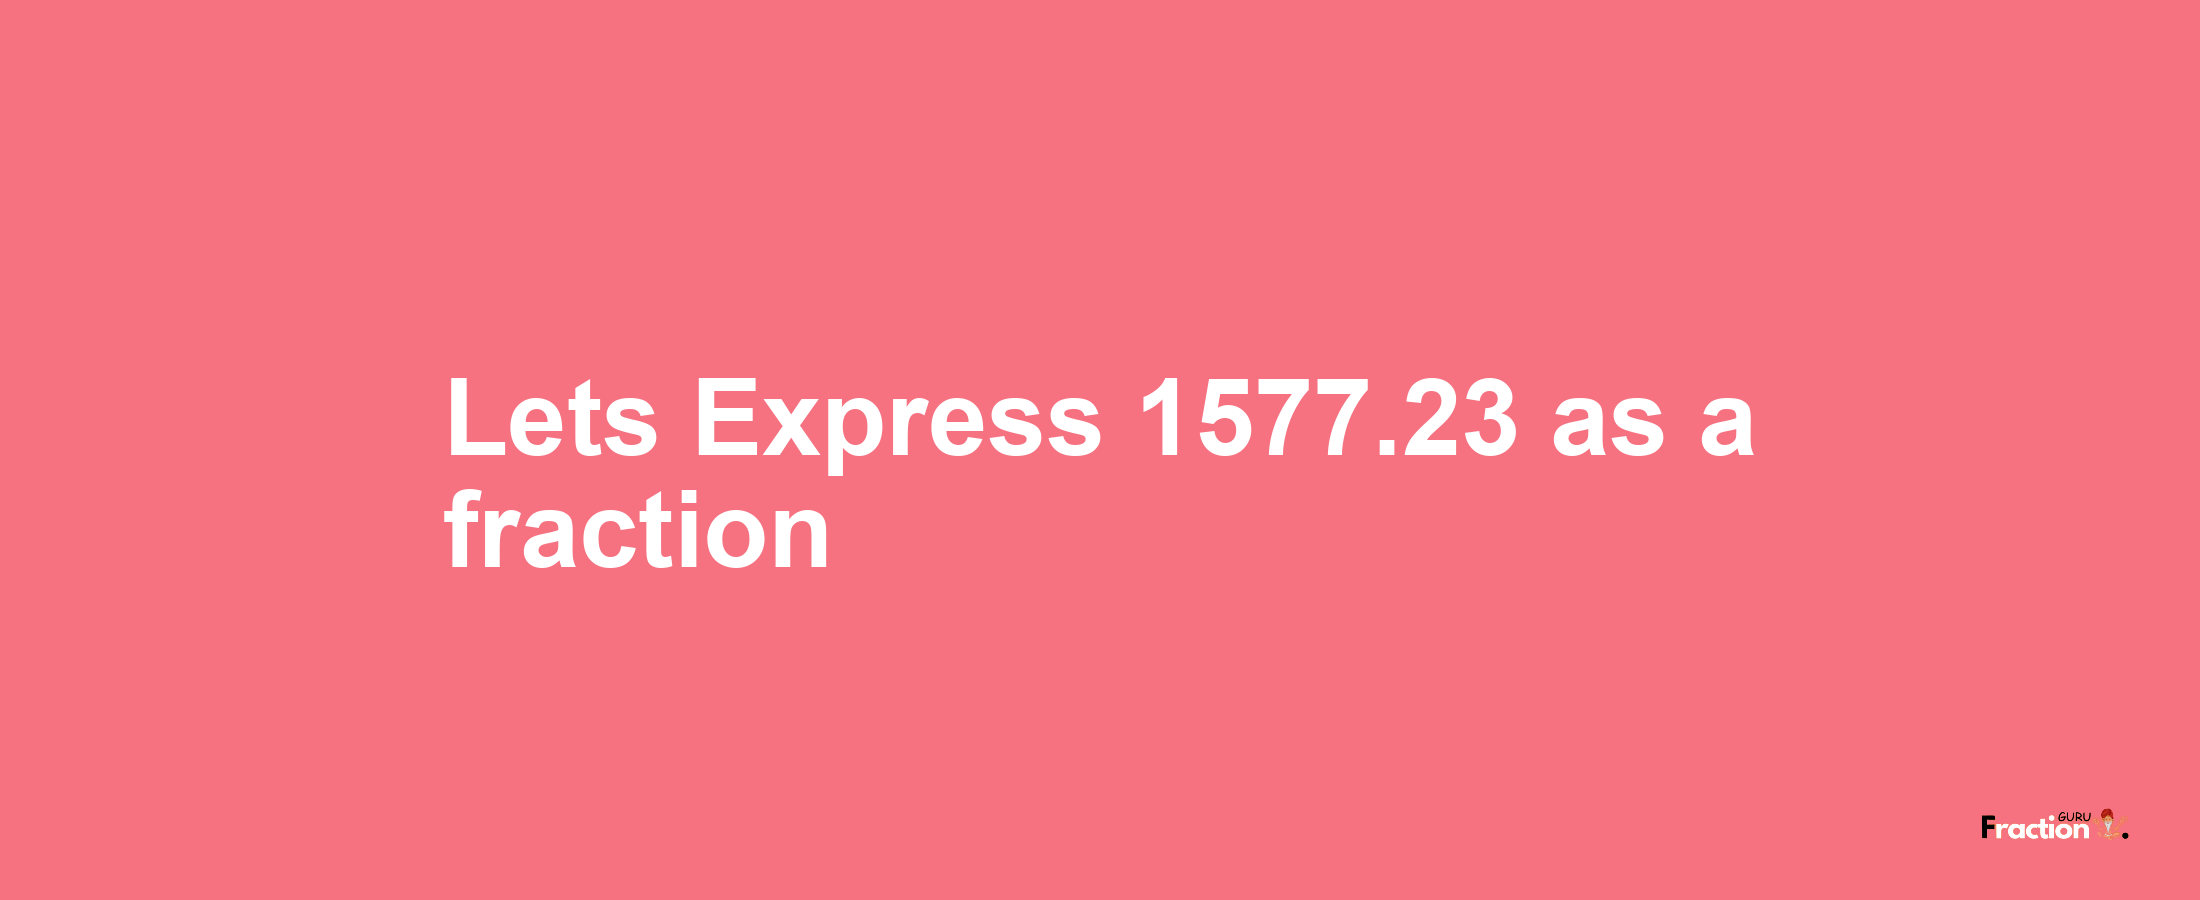 Lets Express 1577.23 as afraction